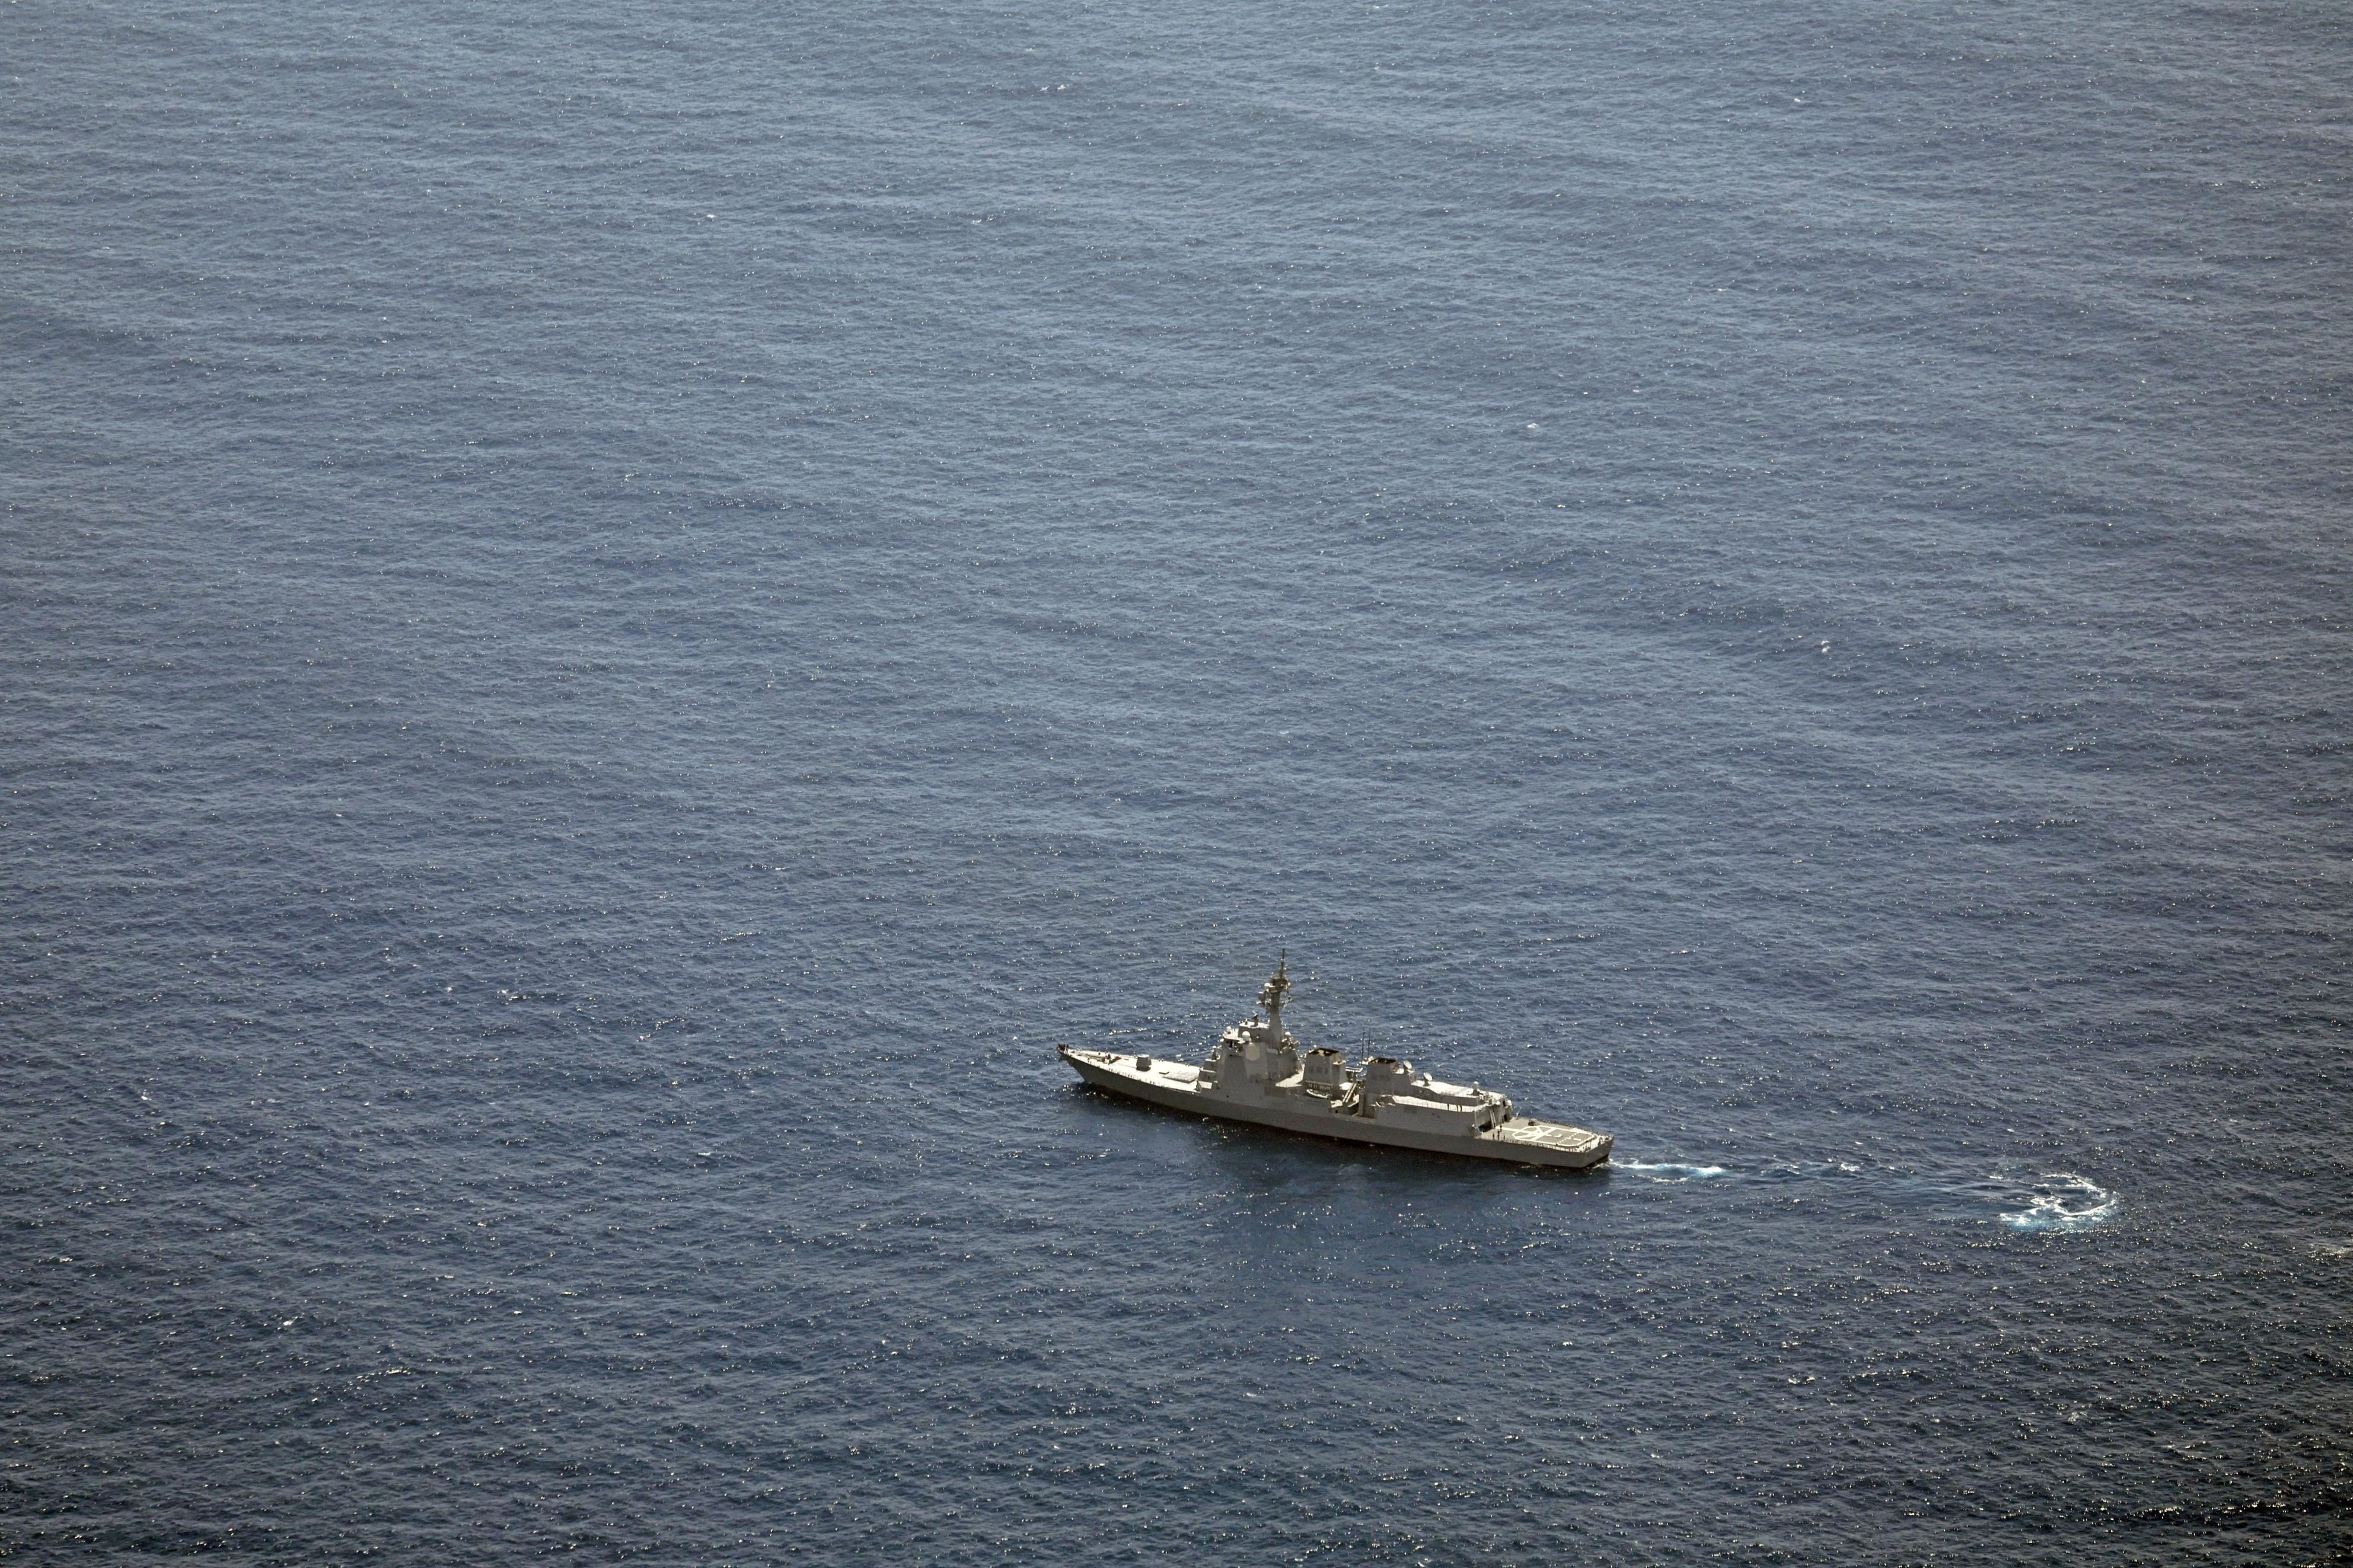 A Japan Maritime Self-Defense Force (JMSDF) vessel conducts a search and rescue operation at the site where two JMSDF helicopters crashed into the sea near Torishima